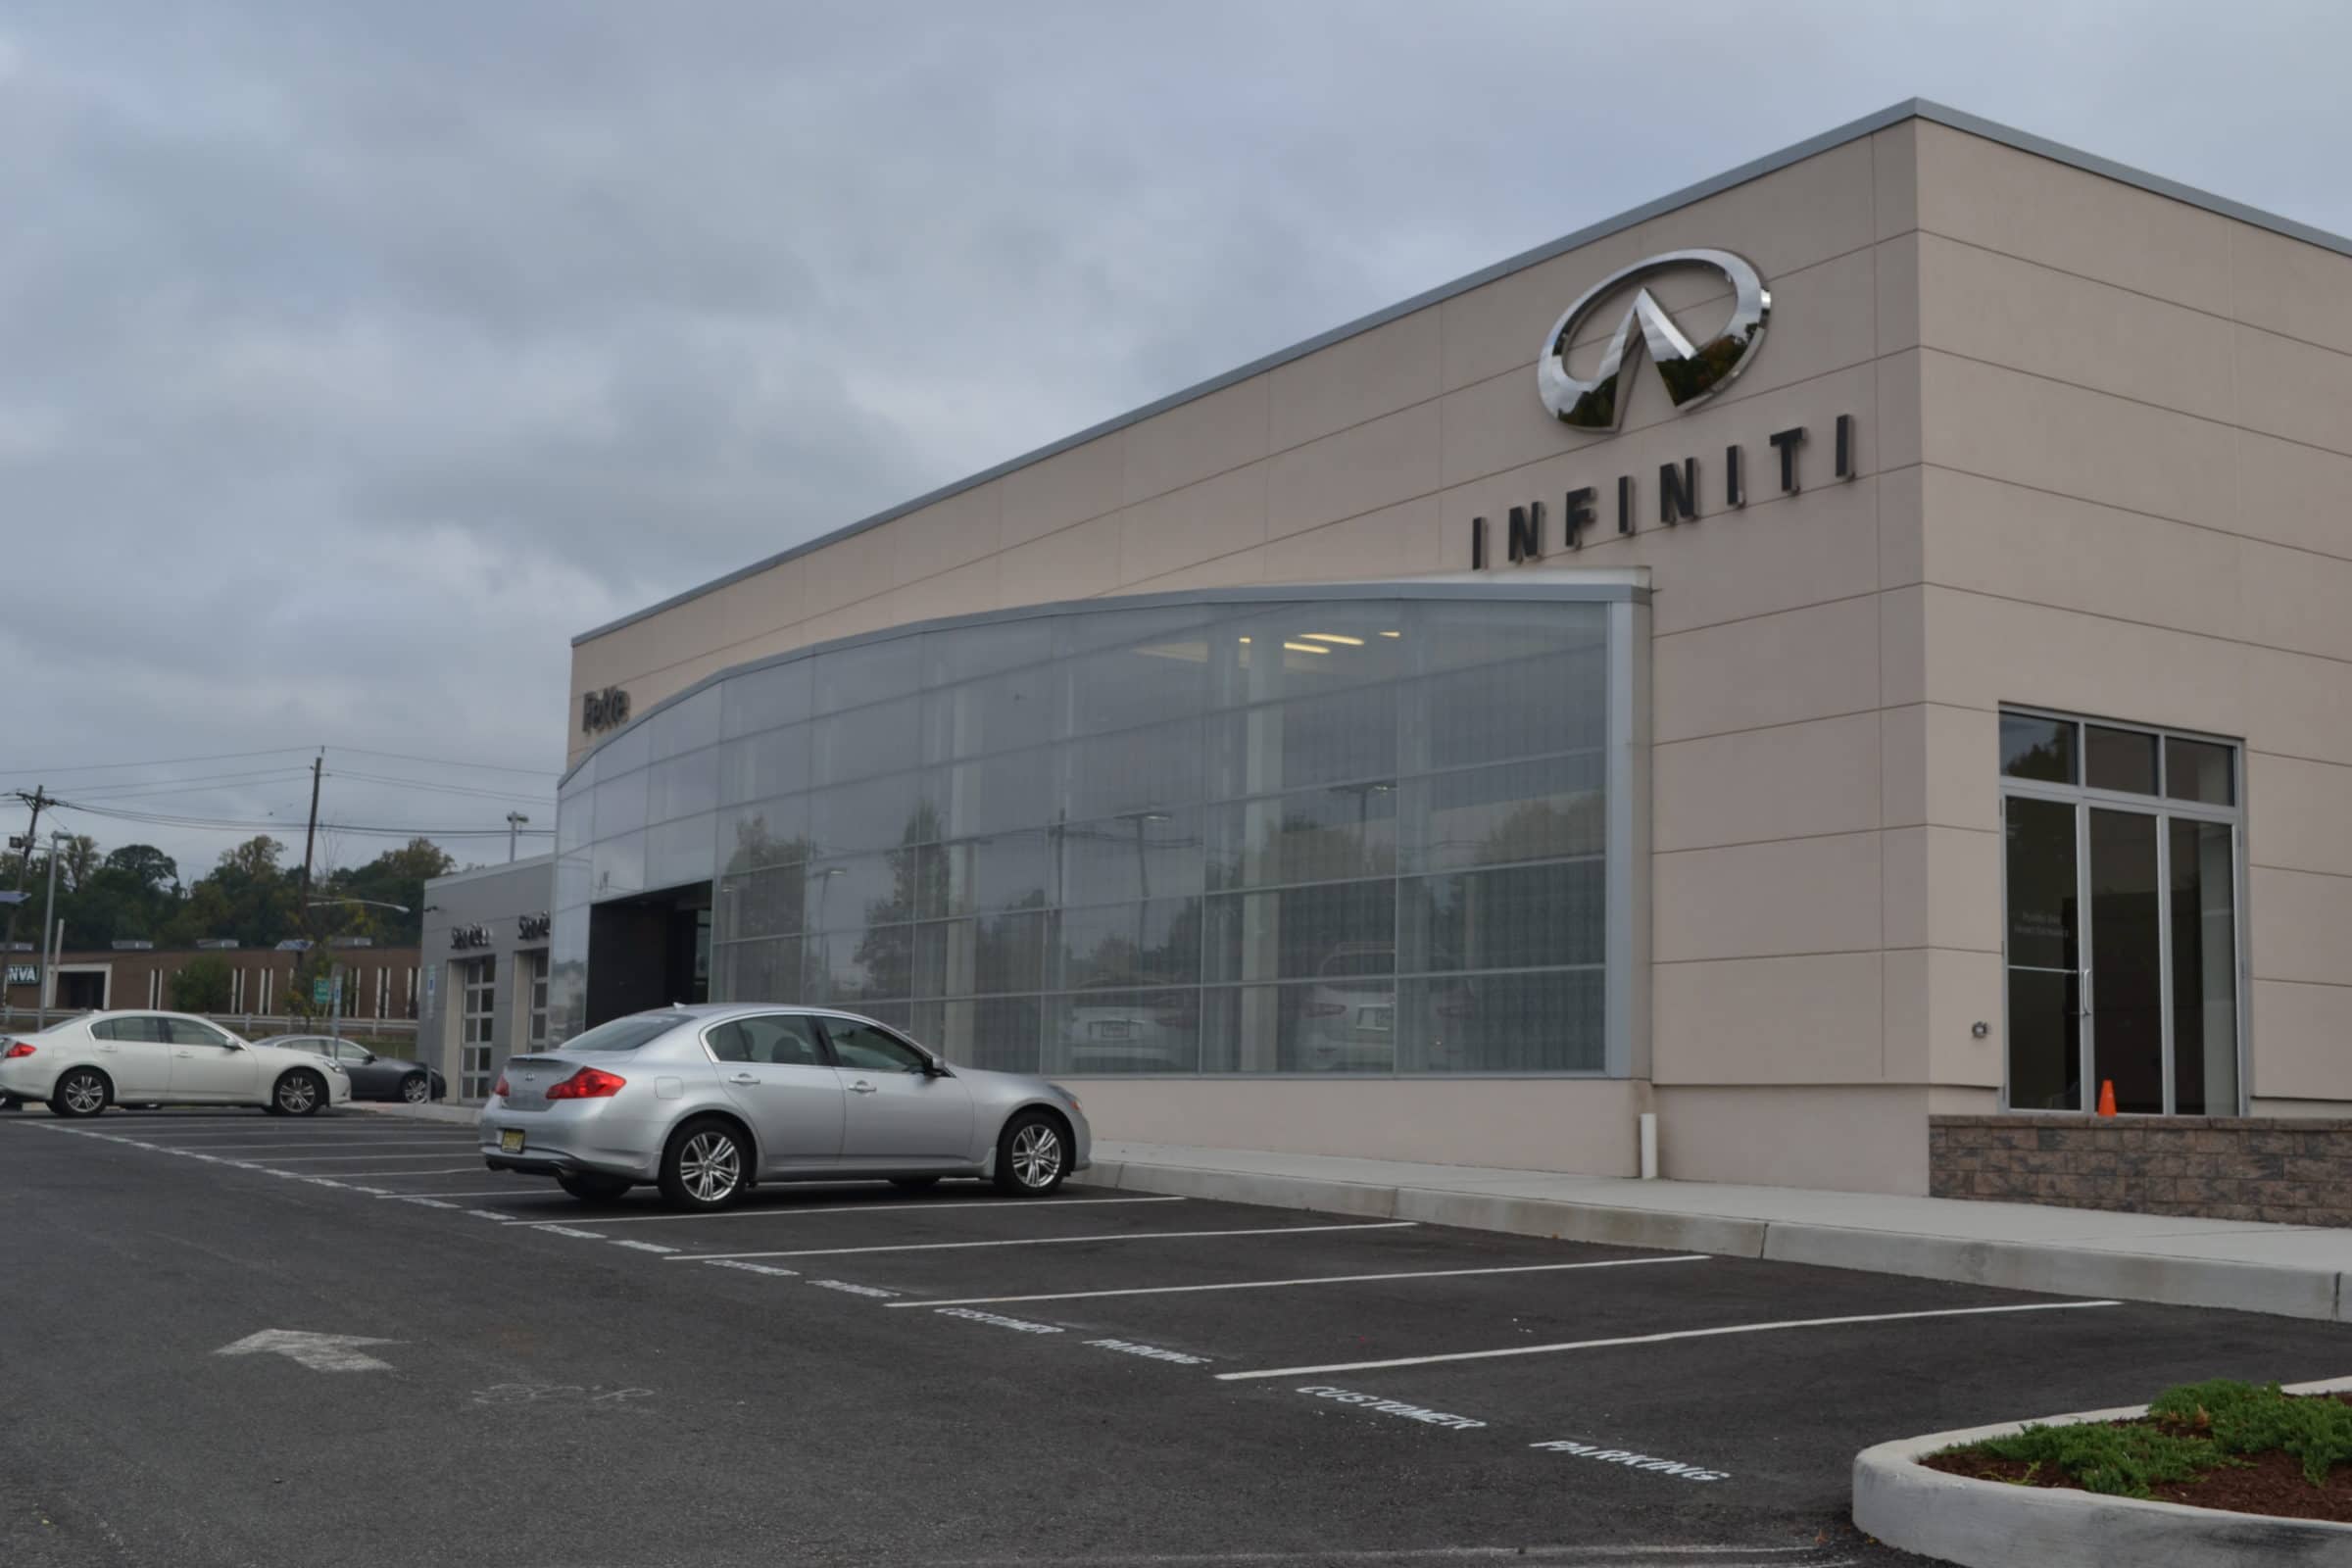 Commercial Masonry Project in Passaic County NJ - Infinity Dealership by McEntee Construction